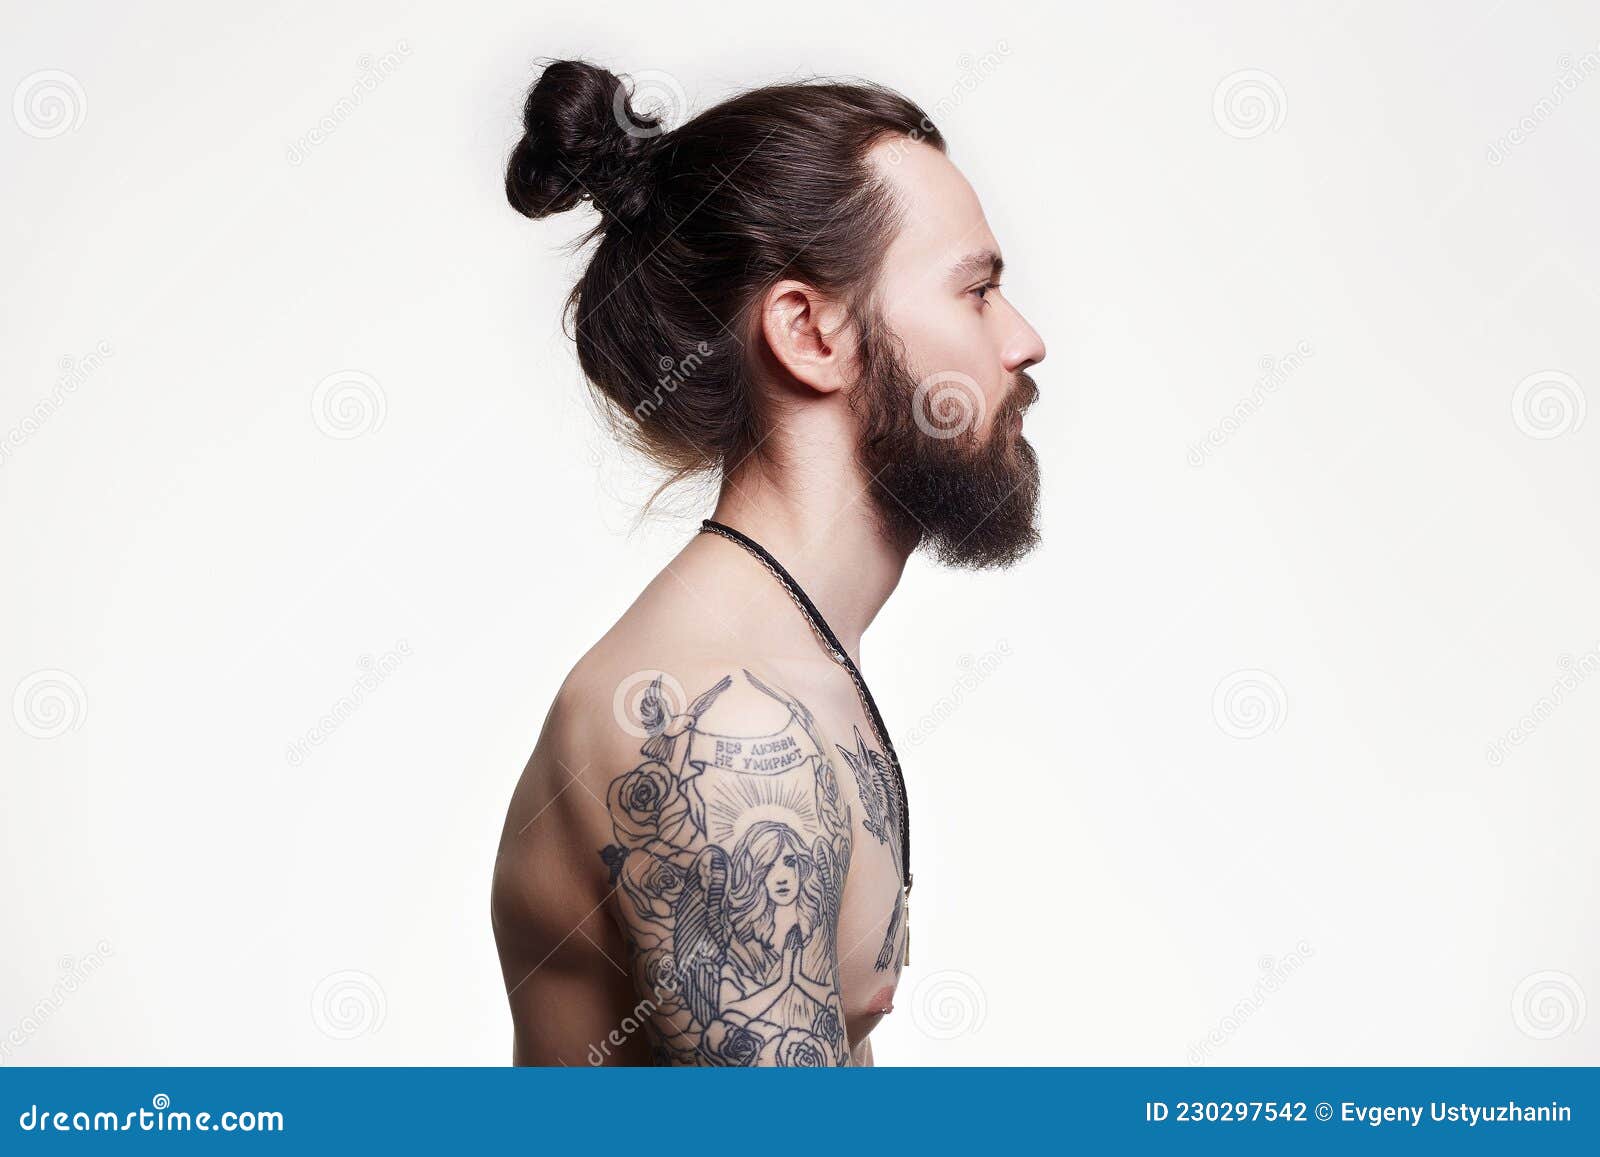 Handsome Bearded Man with Long Hair and Tattoo Stock Photo - Image of cute,  male: 230297542